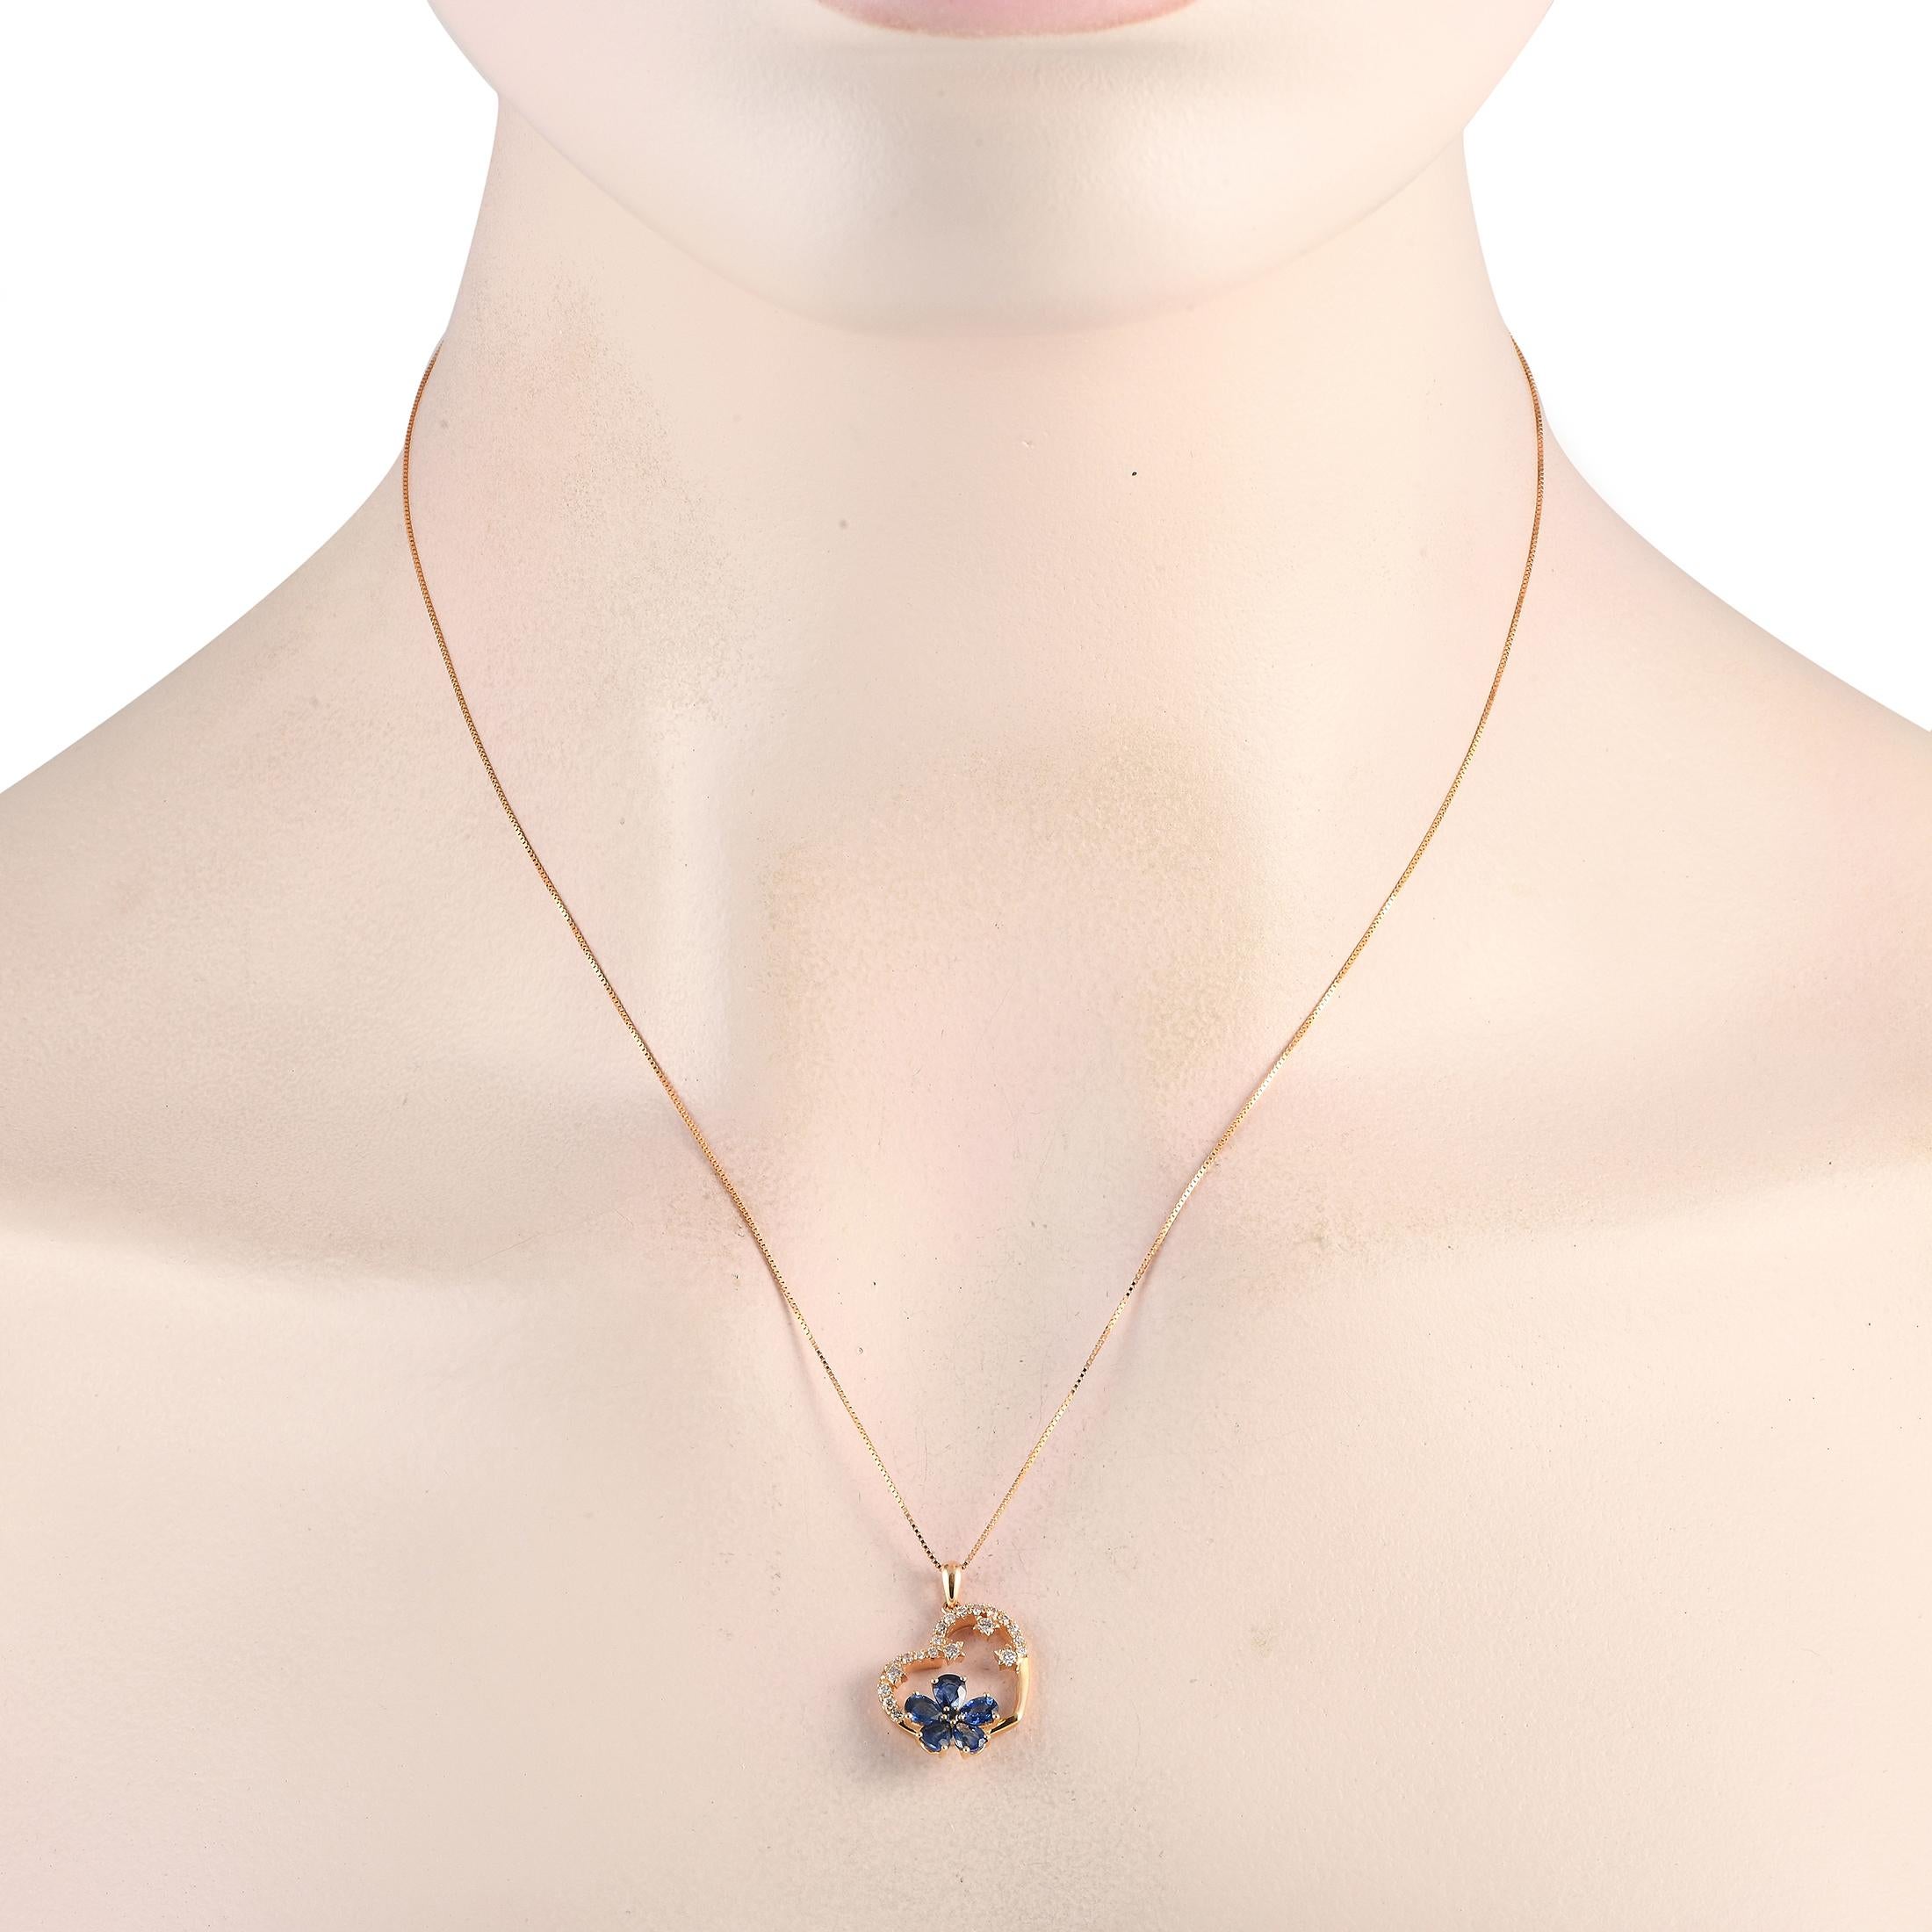 This charming necklace will capture anyones heart. Suspended from an 18 chain, youll find a 14K Rose Gold heart-shaped pendant measuring 0.85 long by 0.65 wide. It comes to life thanks to stunning Sapphires in a floral motif and sparkling Diamonds